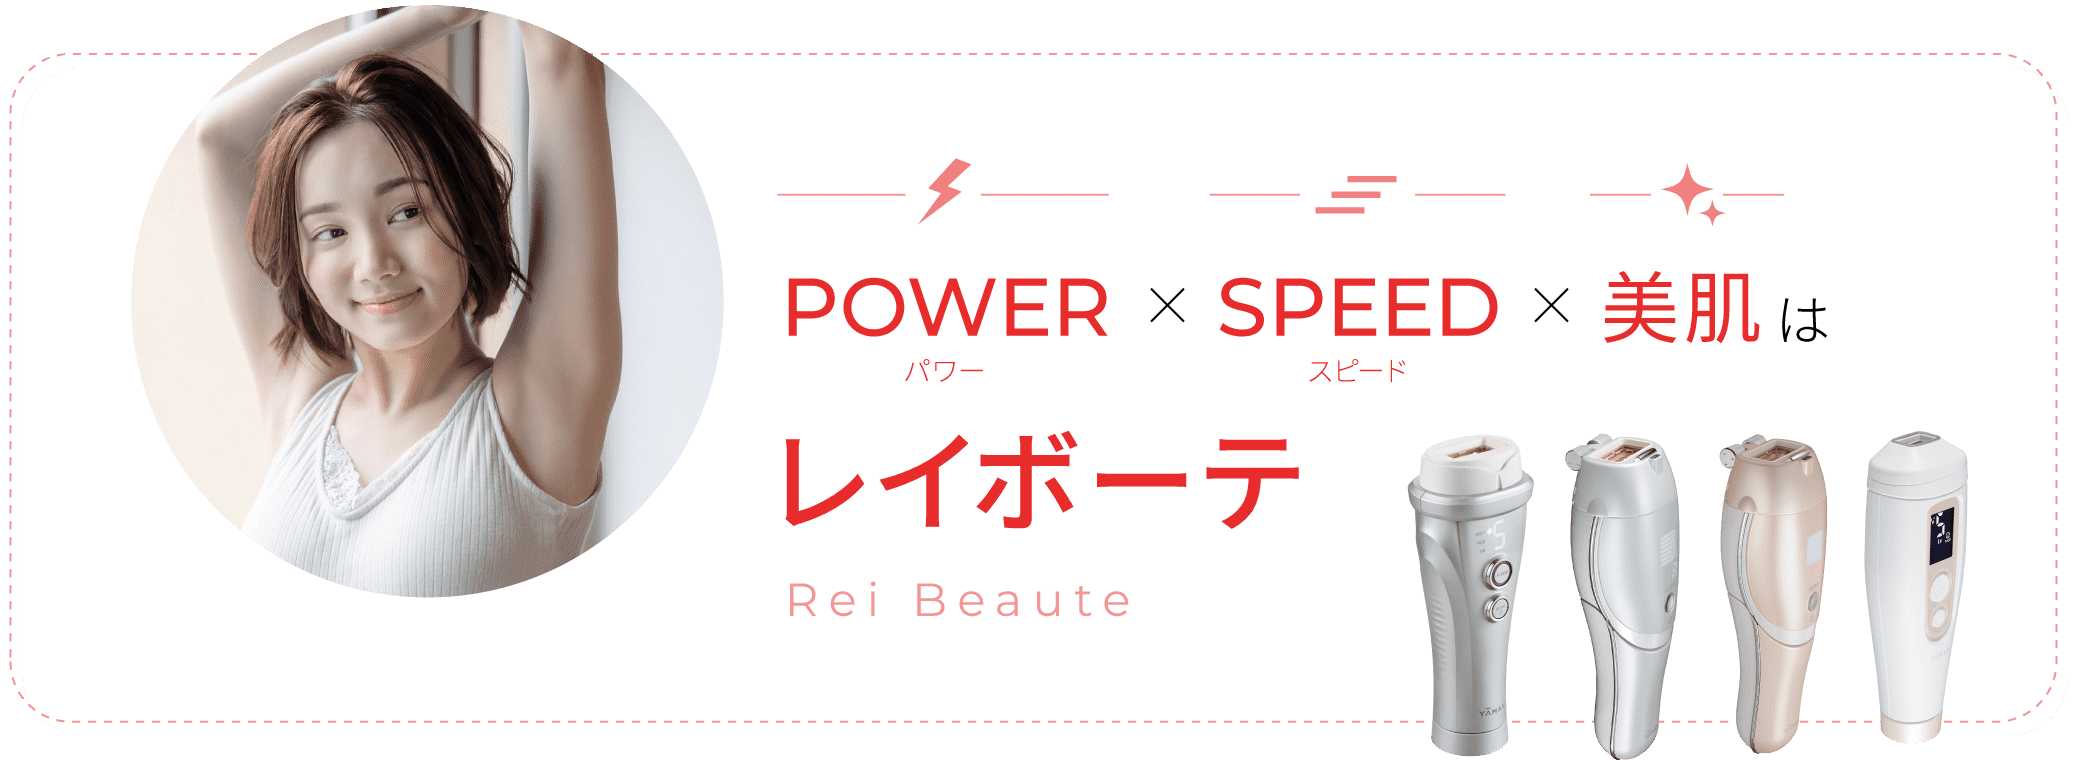 POWER✕SPEED✕美肌はレイボーテ